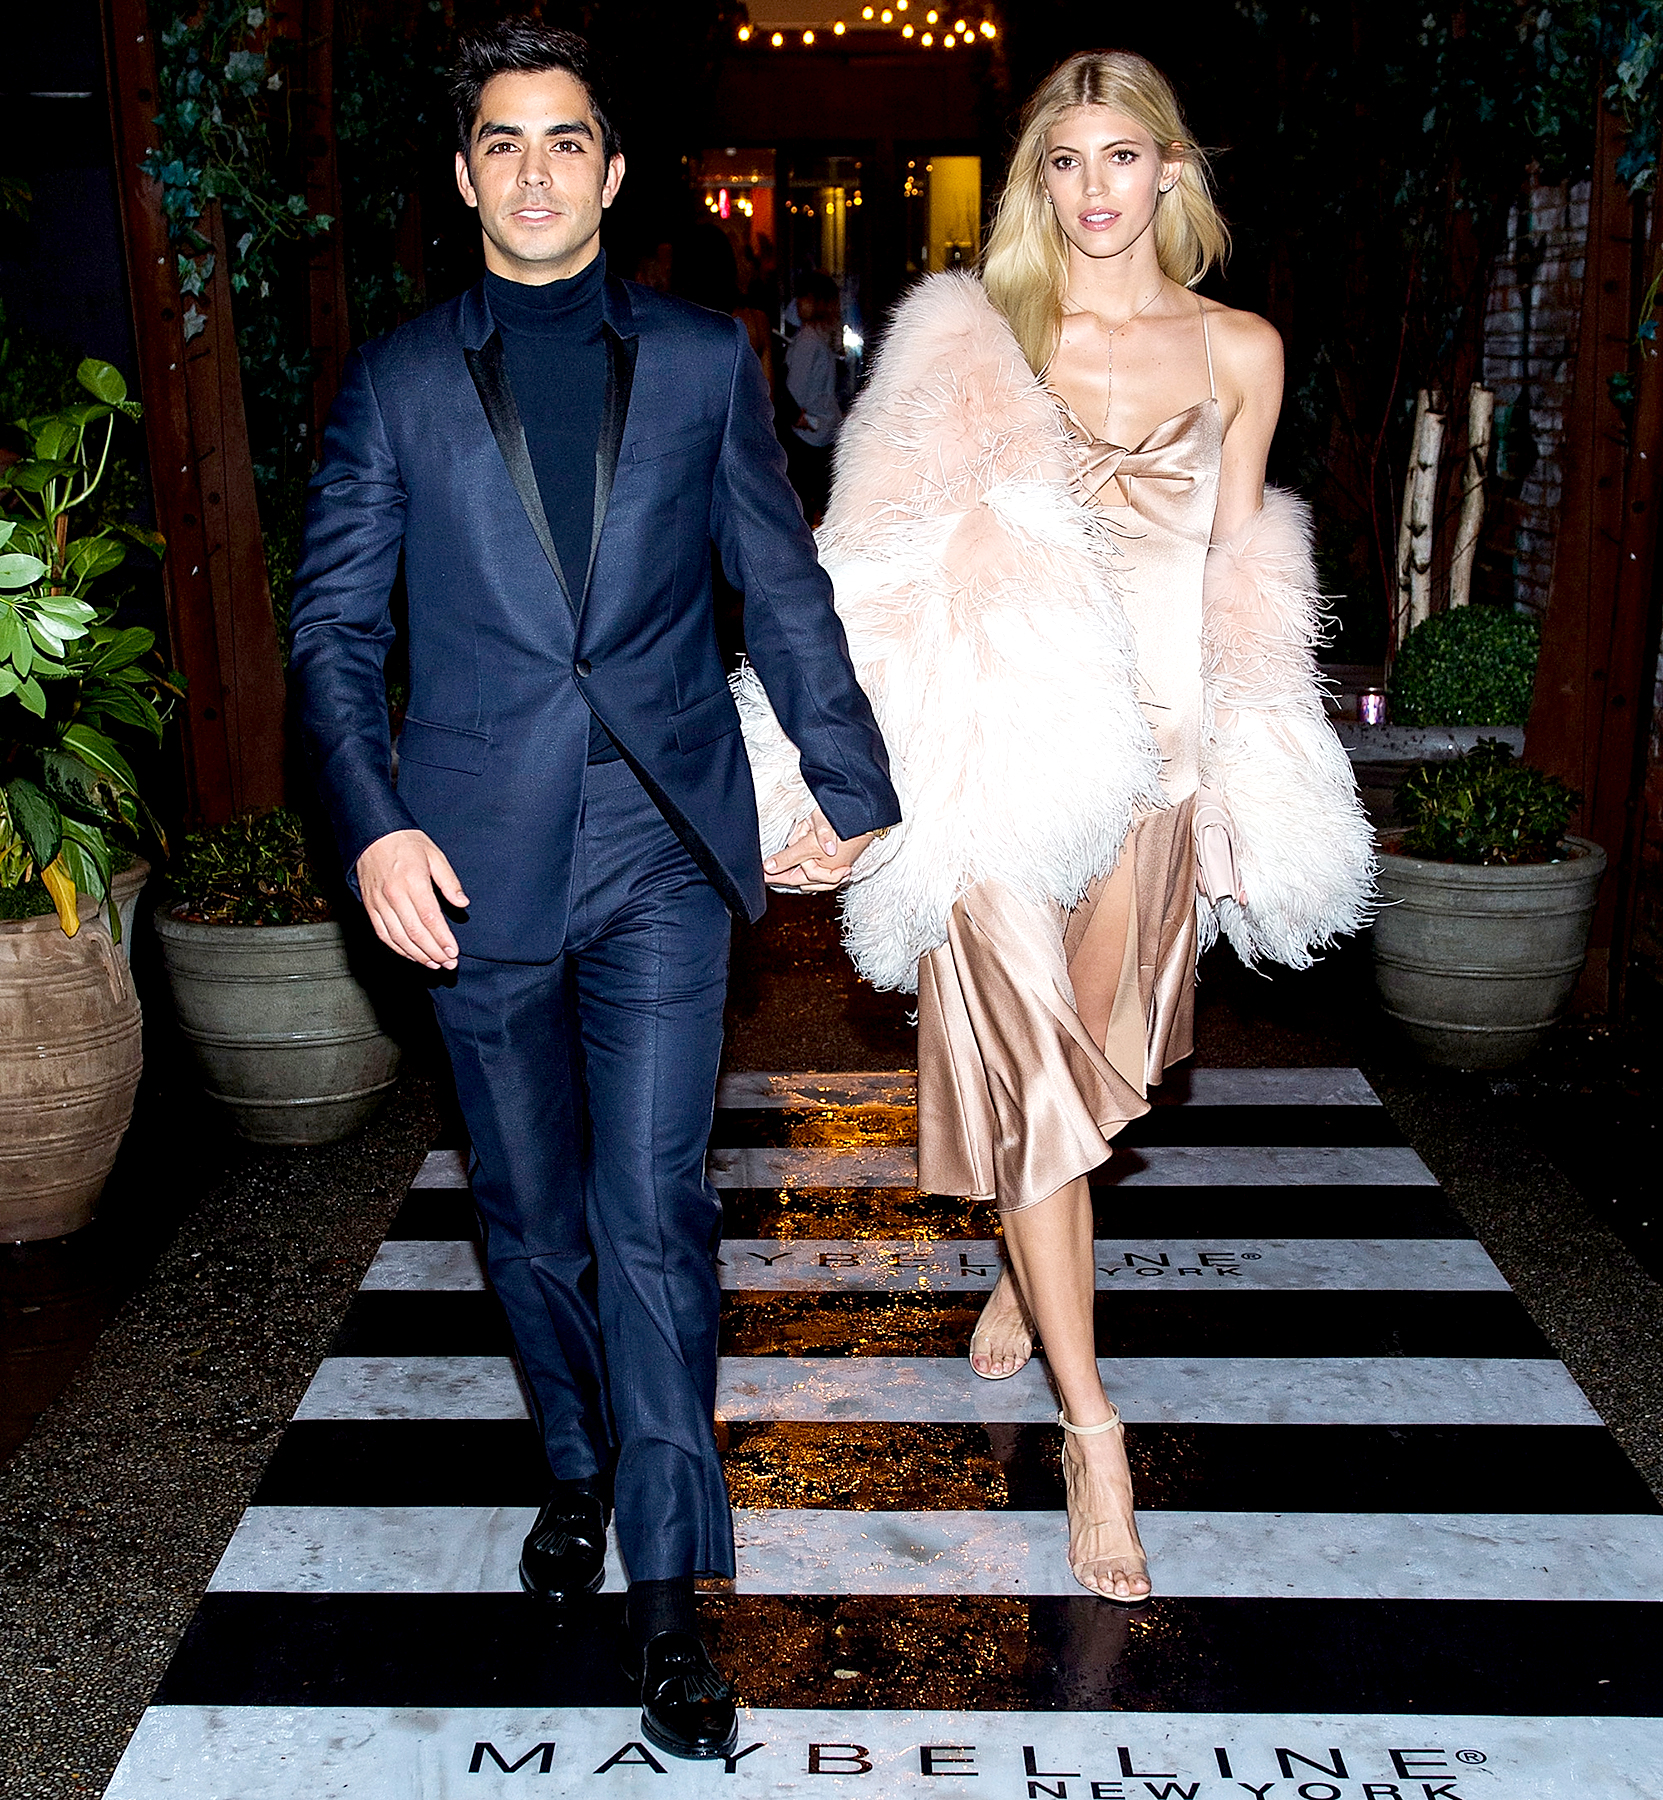 Stunning Pictures of Victoria’s Secret Couples That Will Make You Go Aww